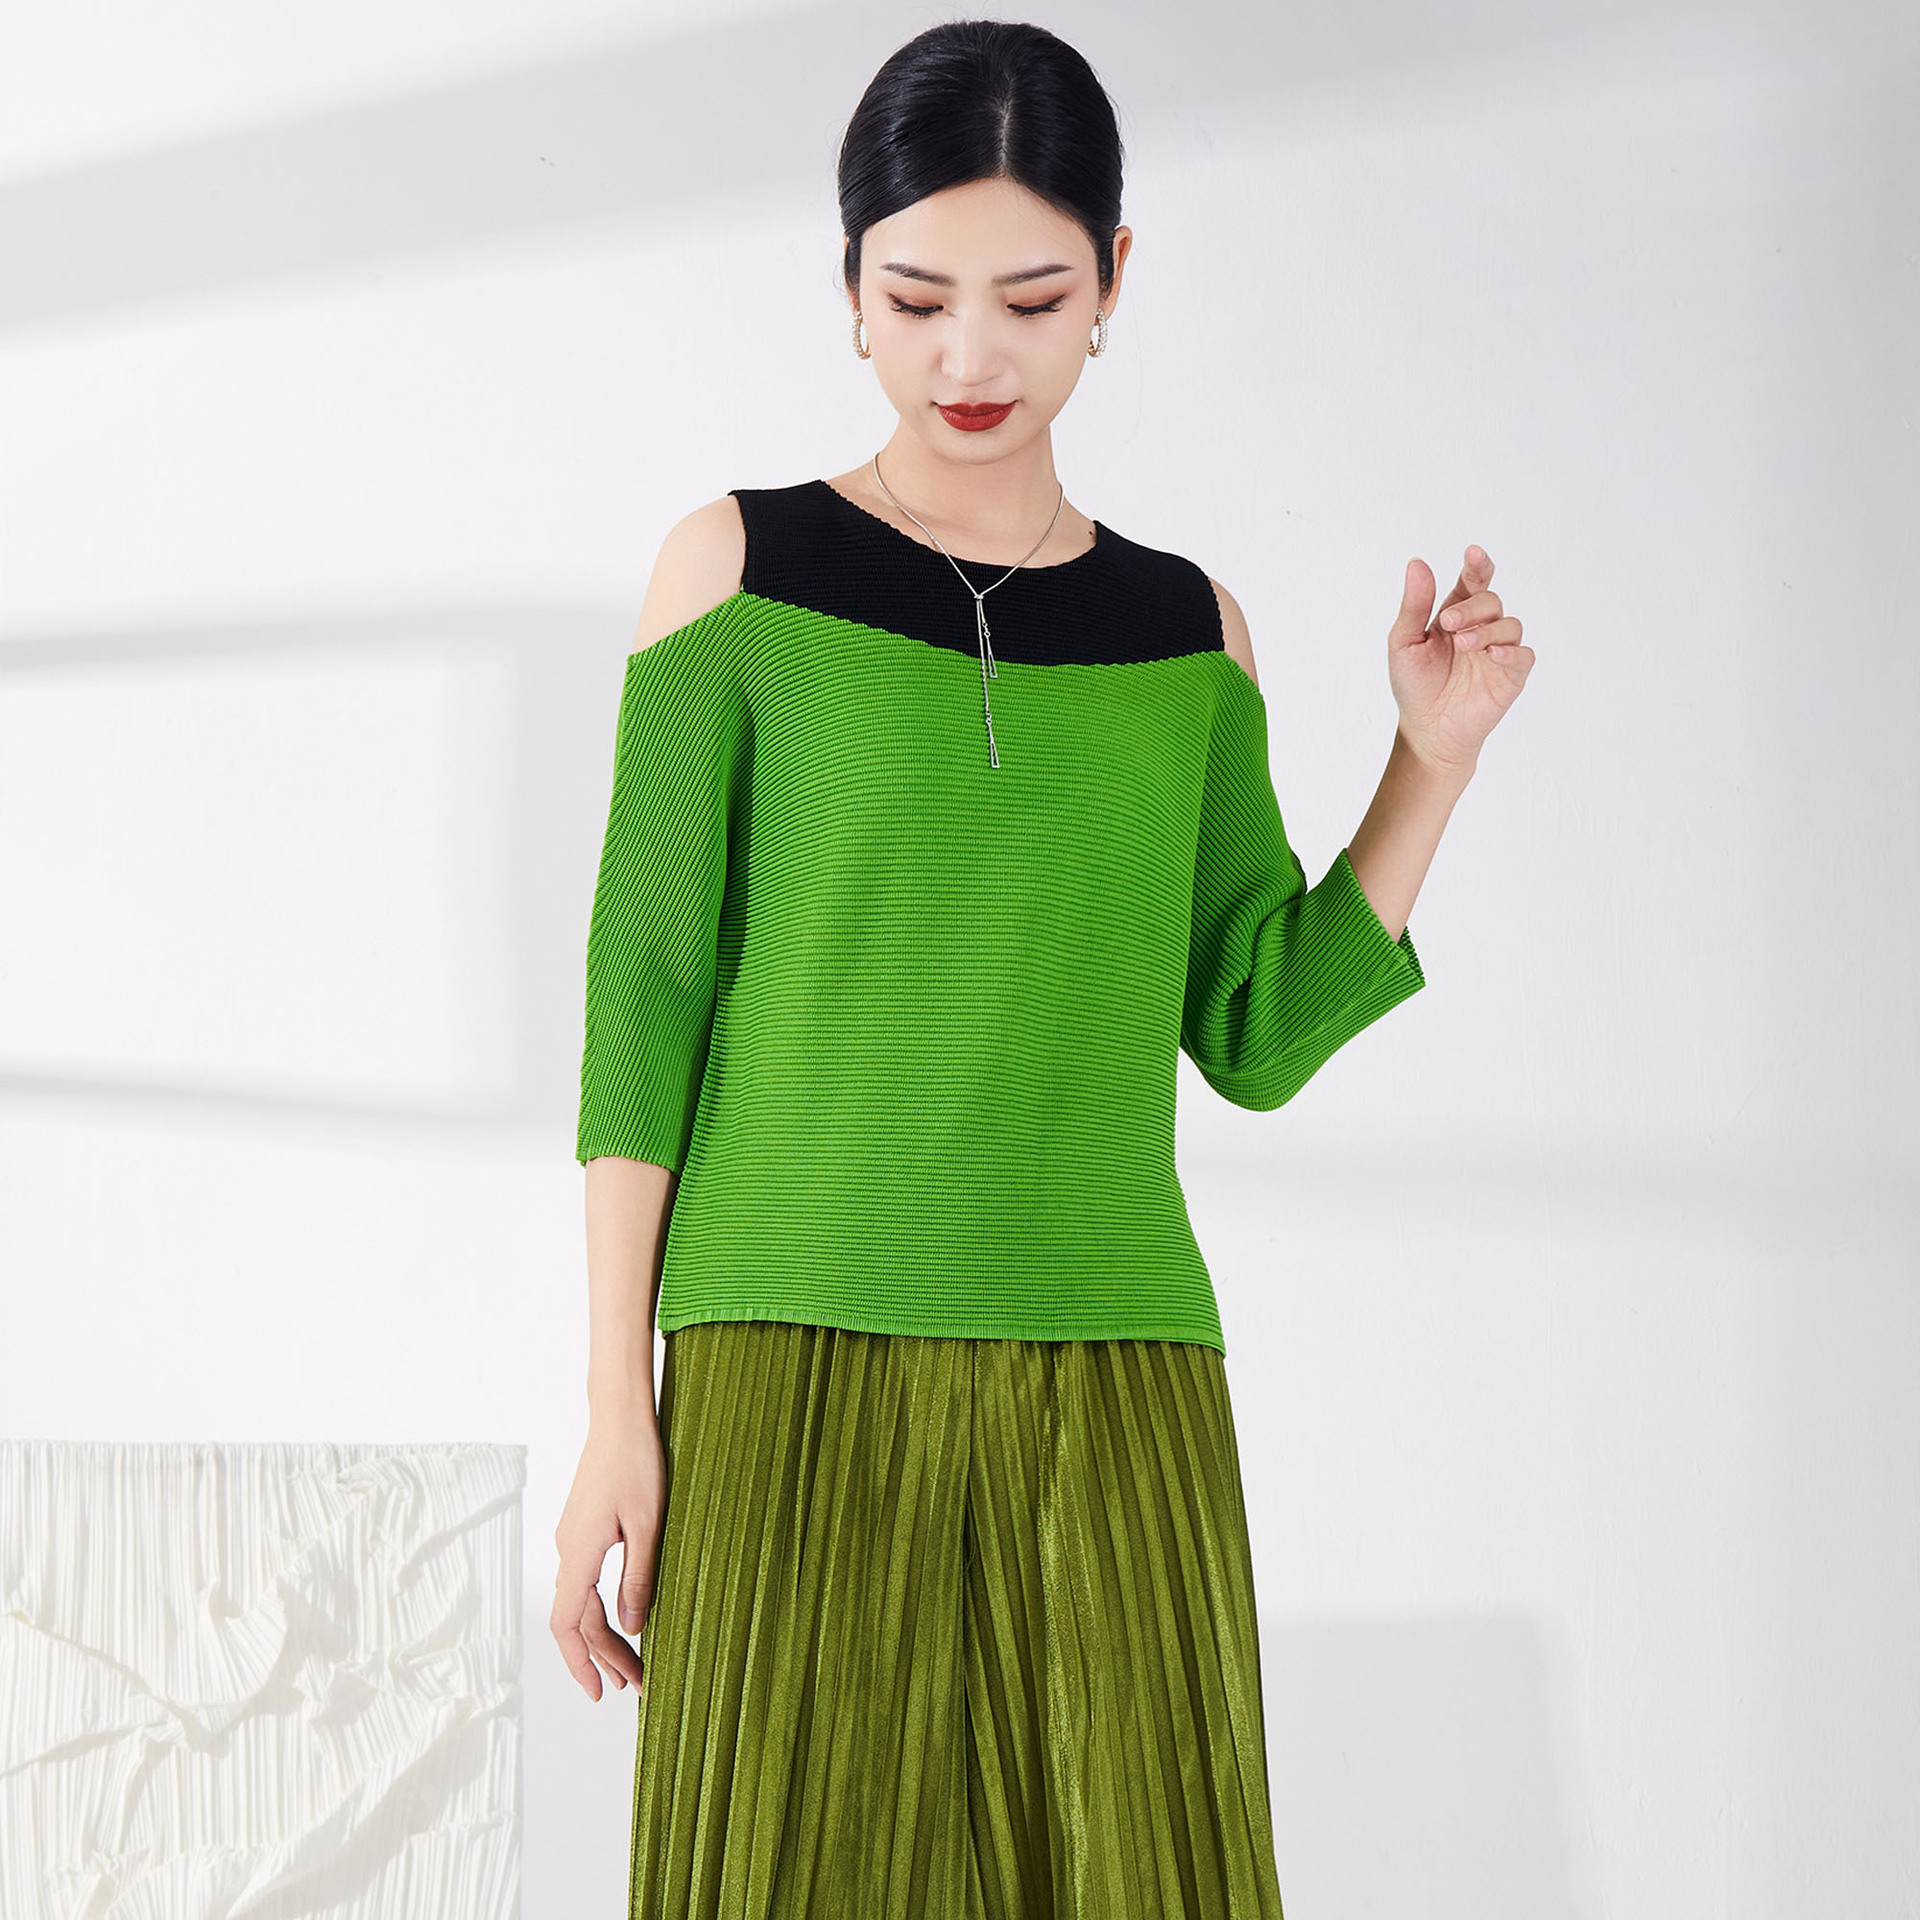 Luxurious Textures to Touch lady's fashion Fashion Tops Flattering Silhouettes in Stylish Tops